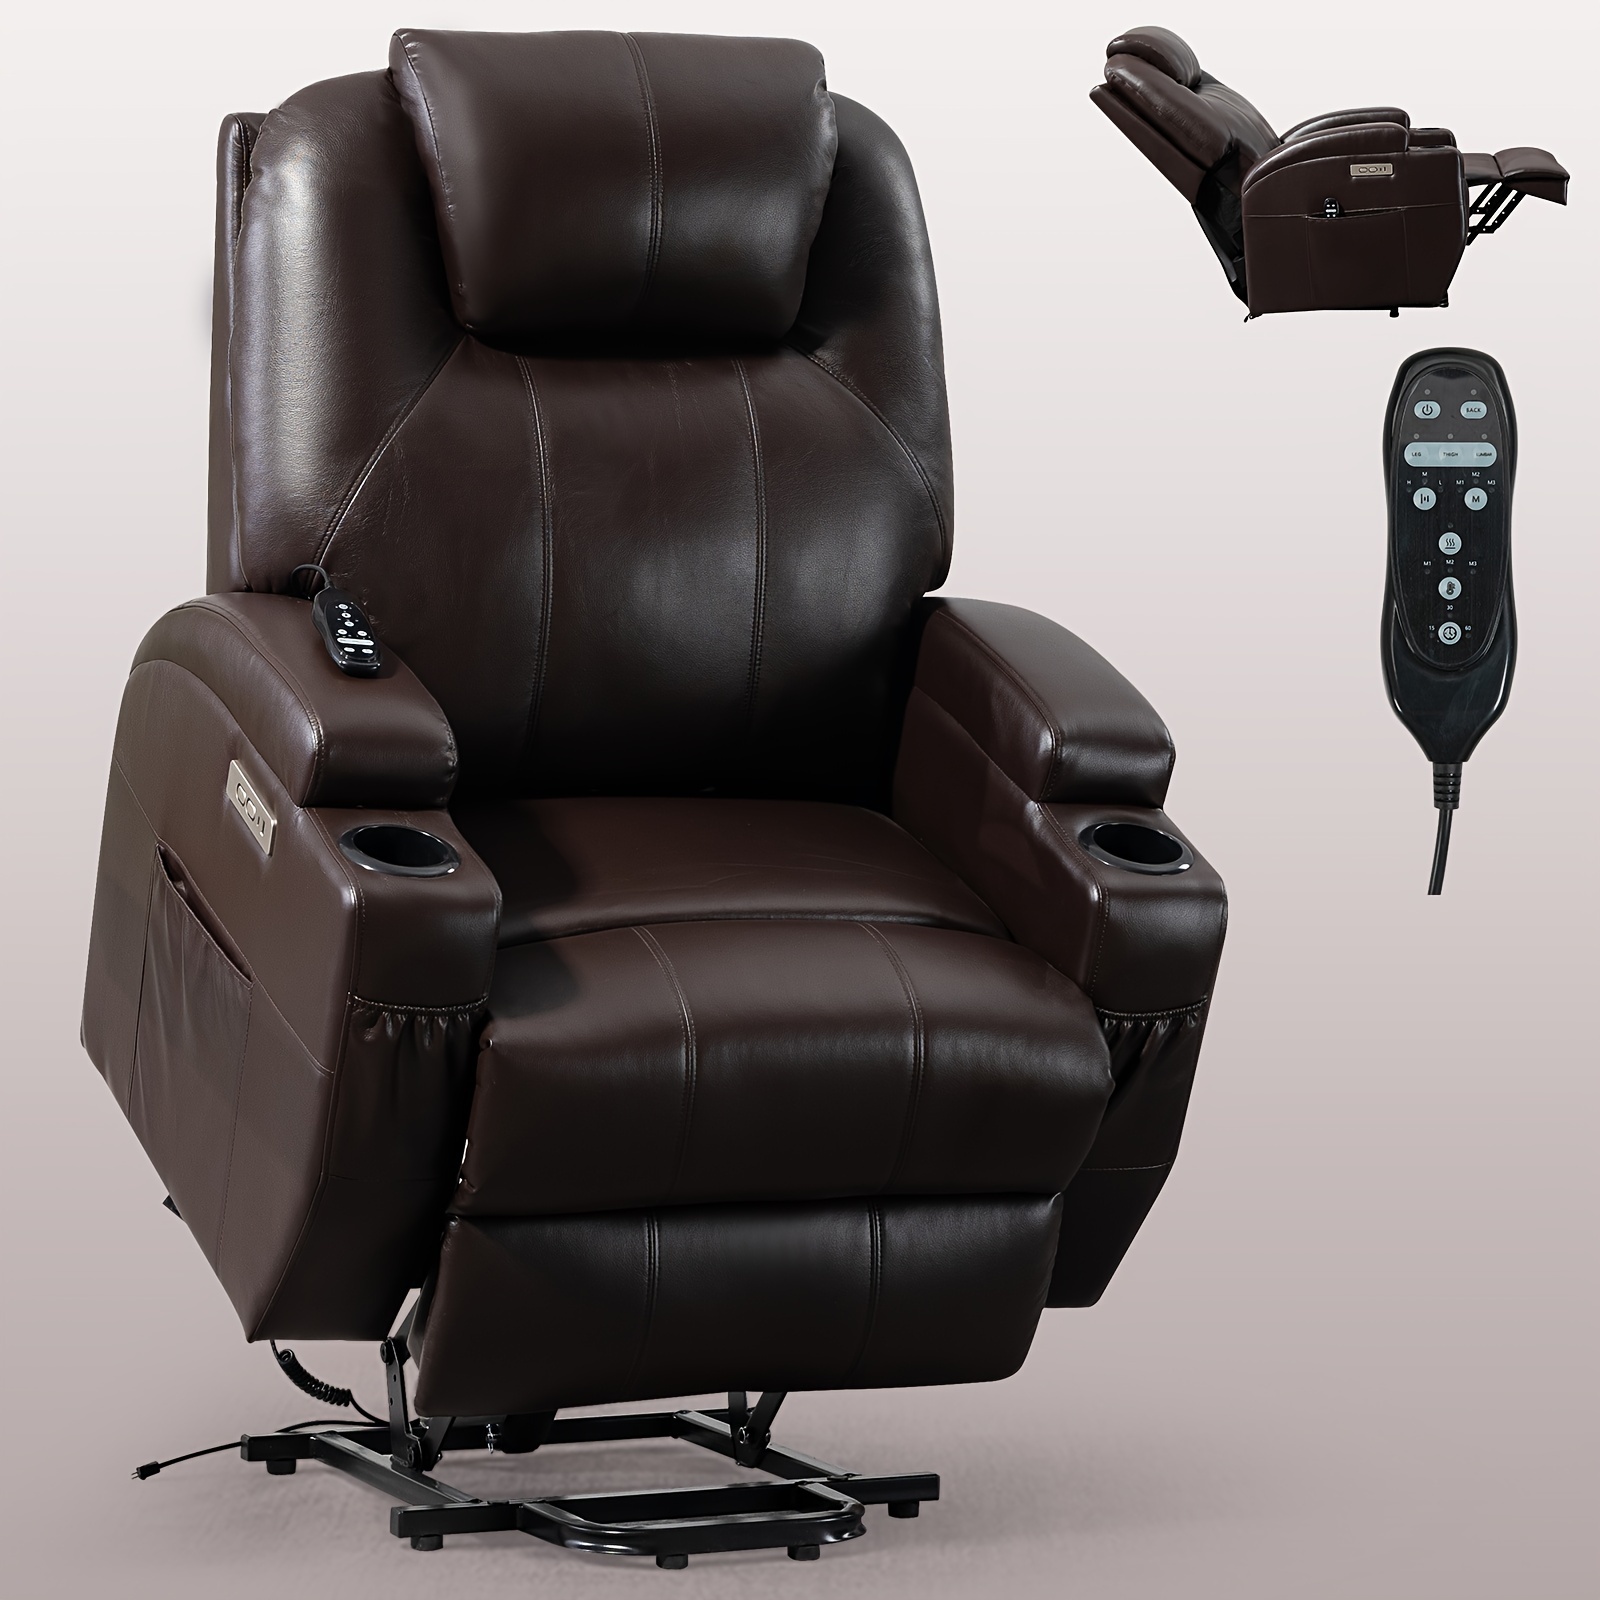 

Recliner Chair For The Elderly, Massage Recliner With Heating Function For Sleeping, Lift Chair With 2 Cupholders, Footrest, 2 Side Pocket